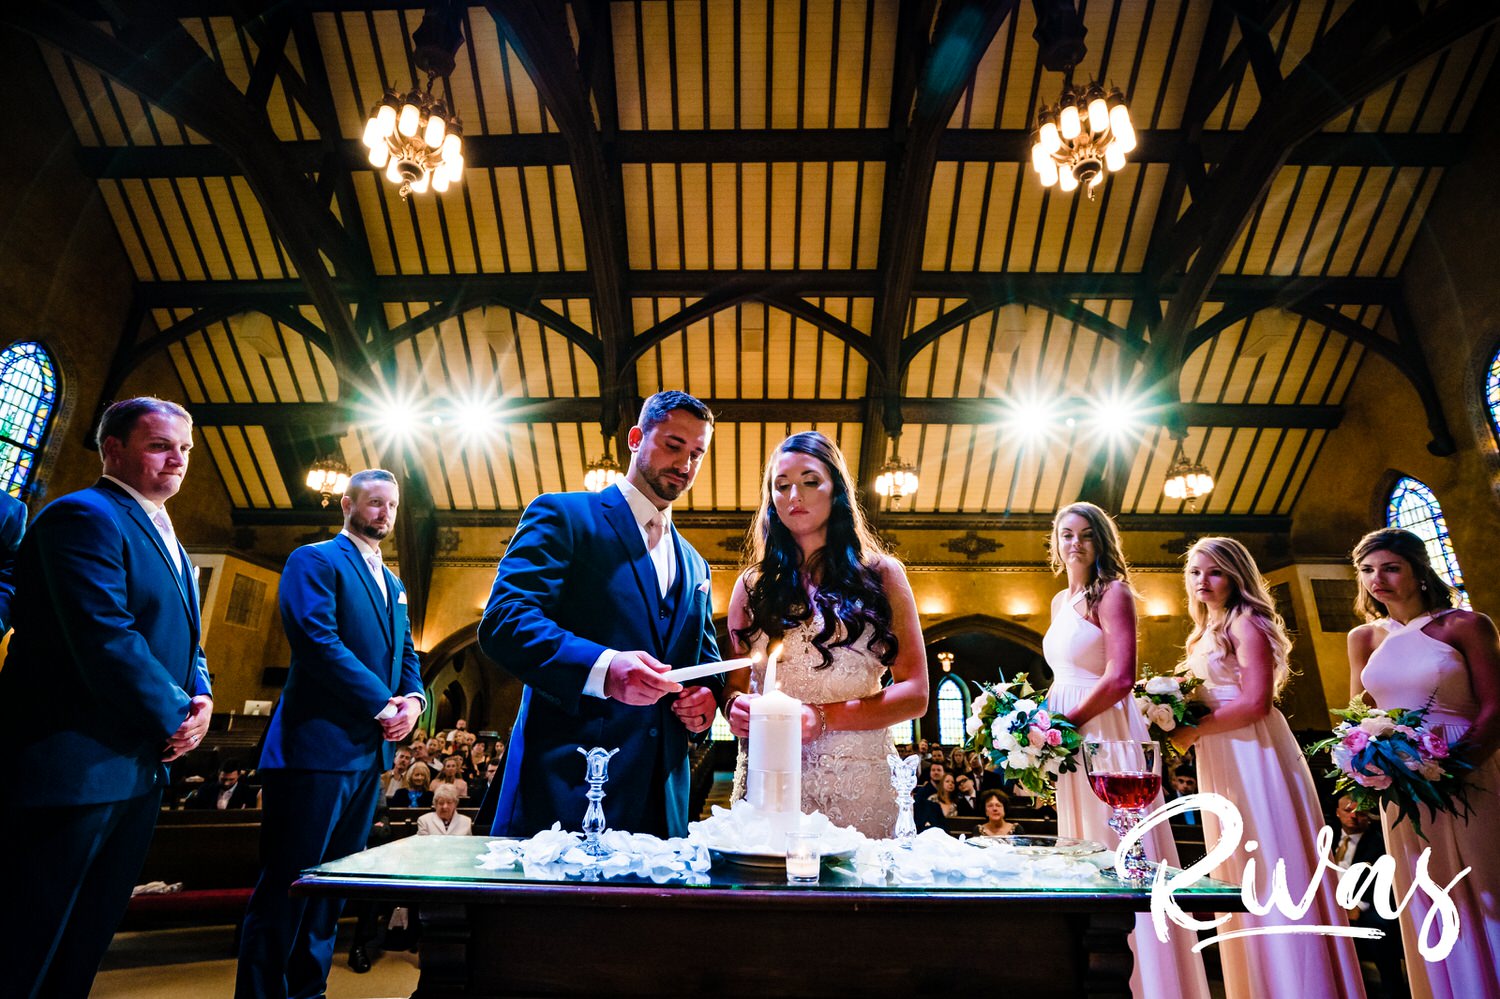 A colorful, candid picture taken from behind the altar of a bride and groom leaning together lighting their unity candle during their wedding ceremony. 